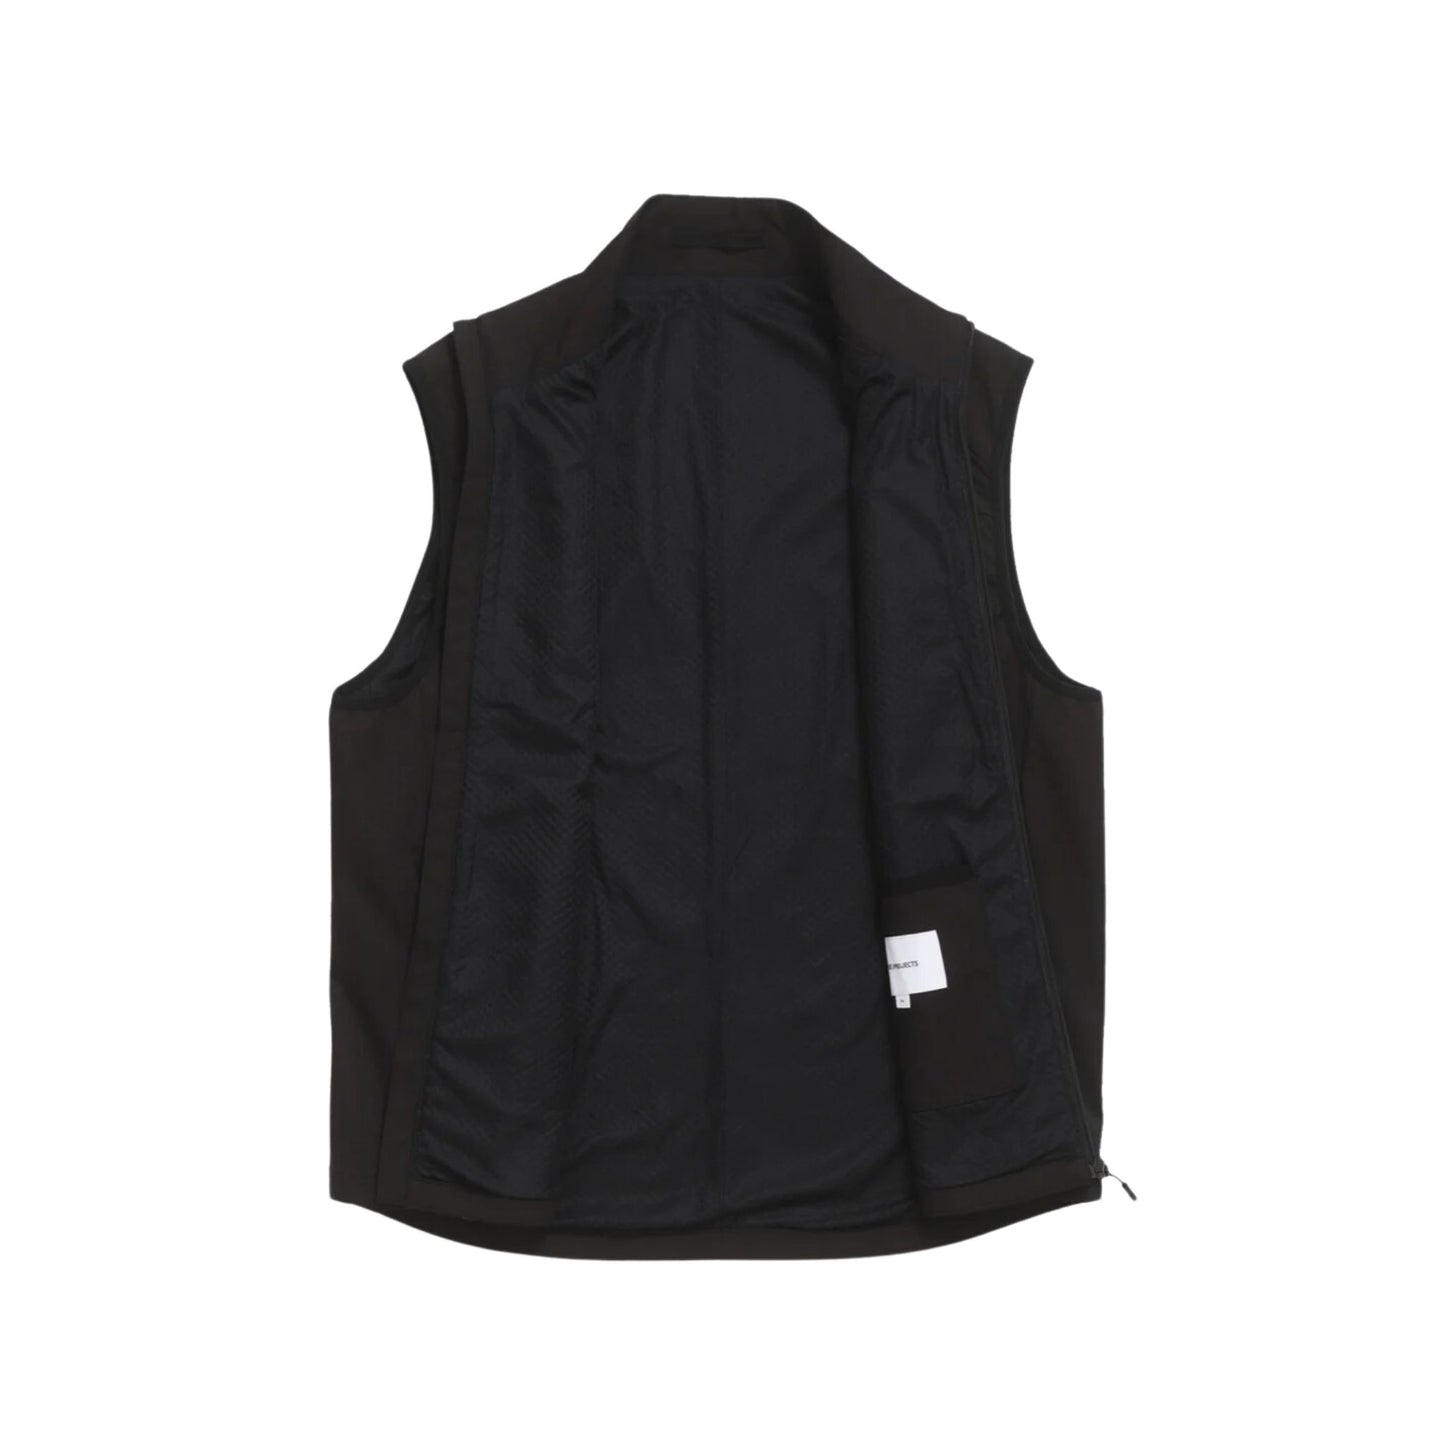 NORSE PROJECTS - Birkholm Solotex Twill Vest